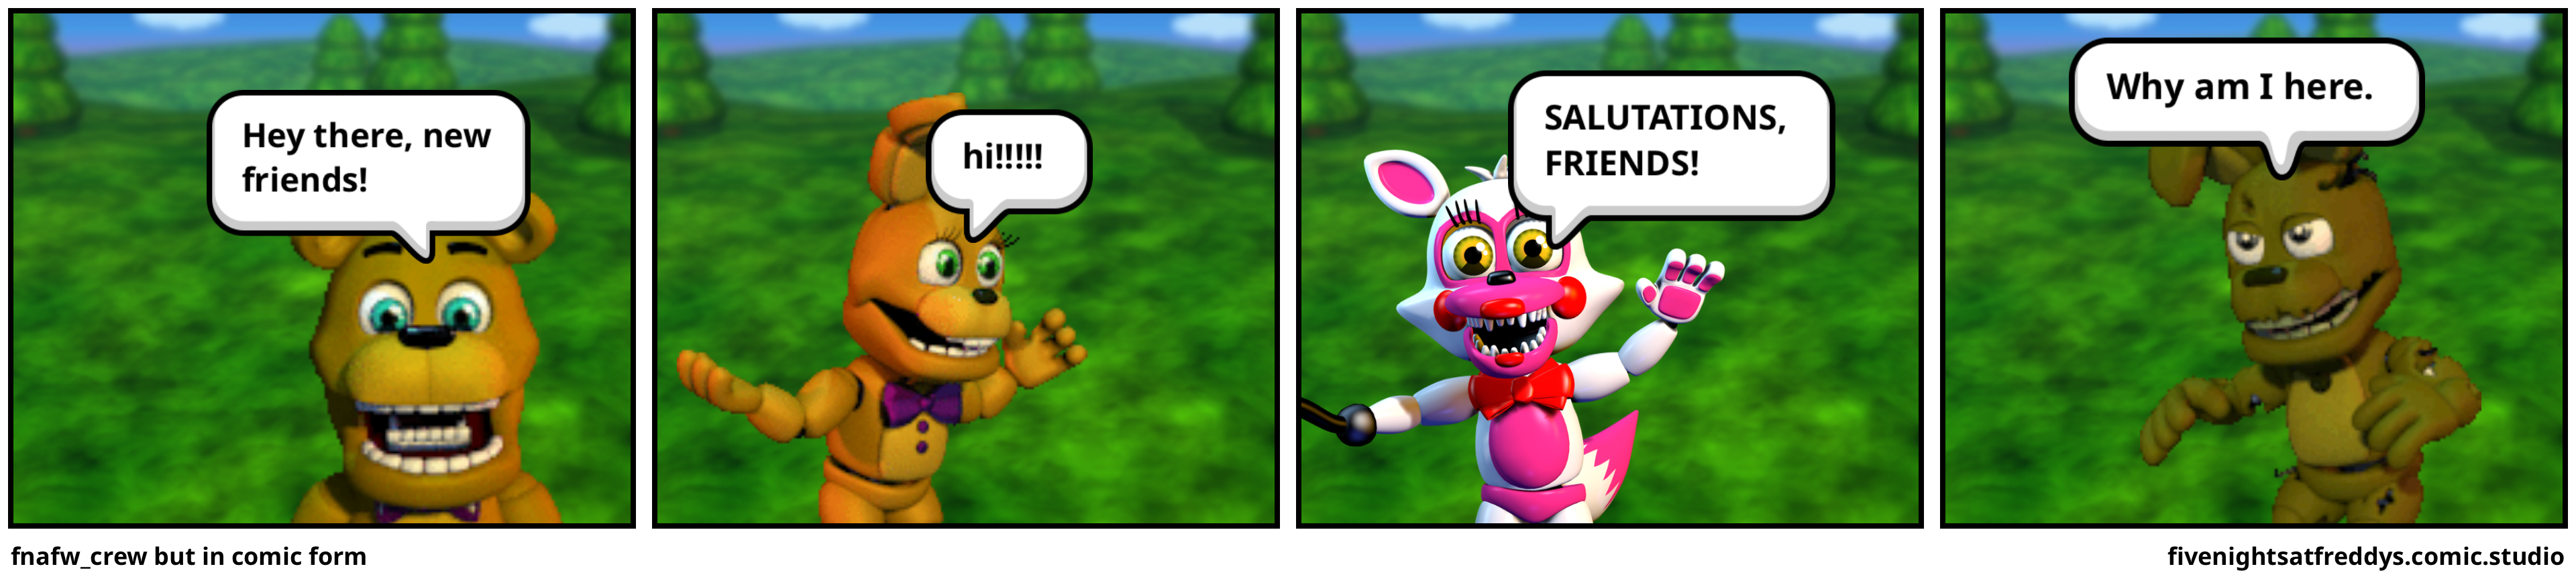 fnafw_crew but in comic form